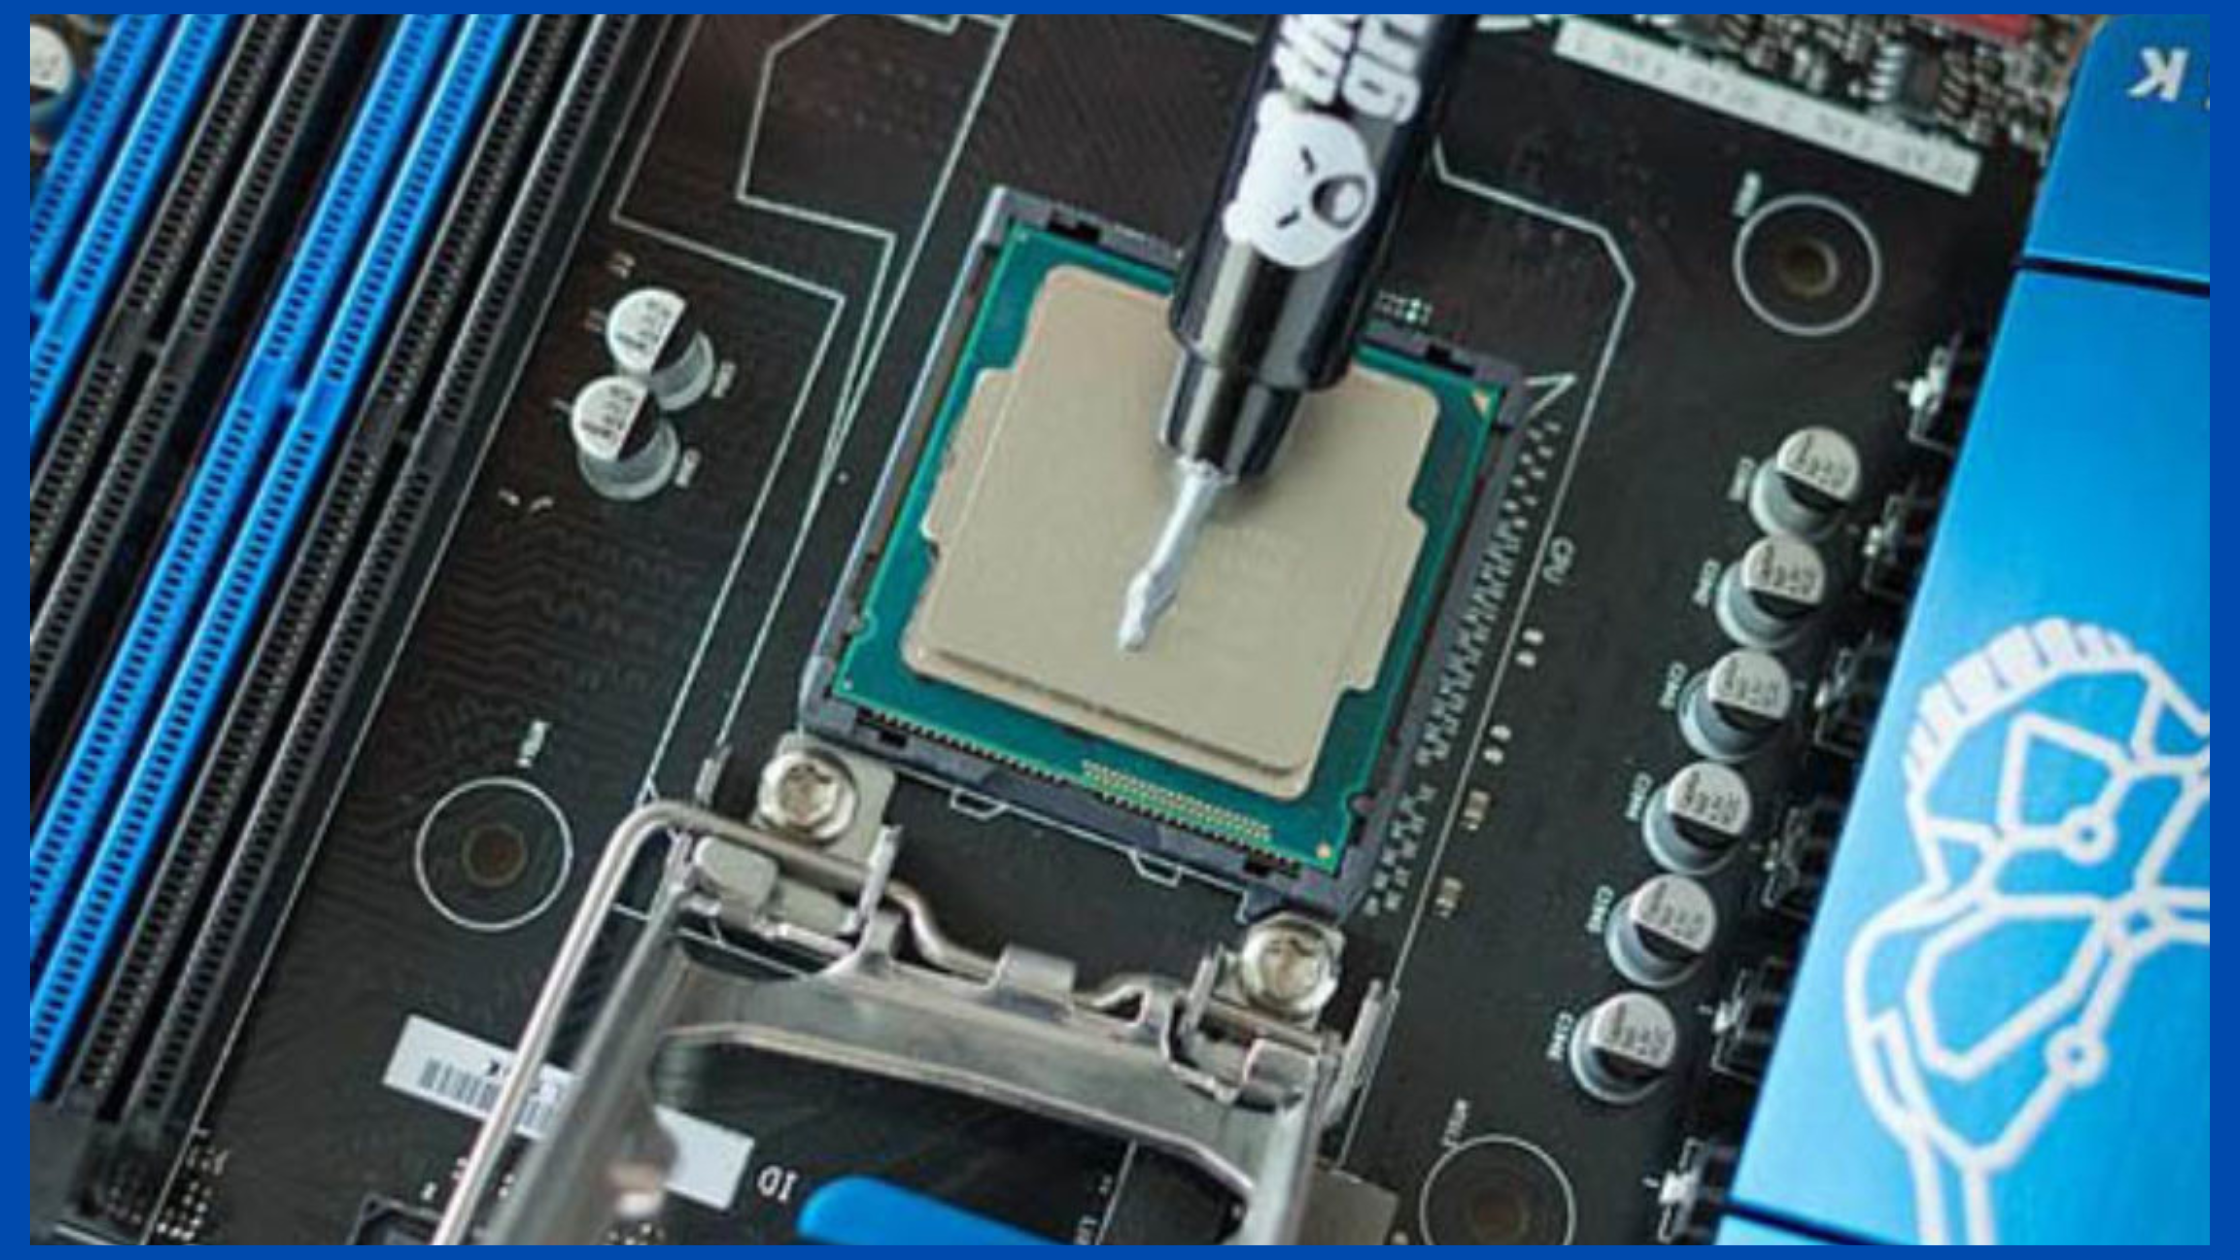 How Do you apply thermal paste to a CPU?(Explained)